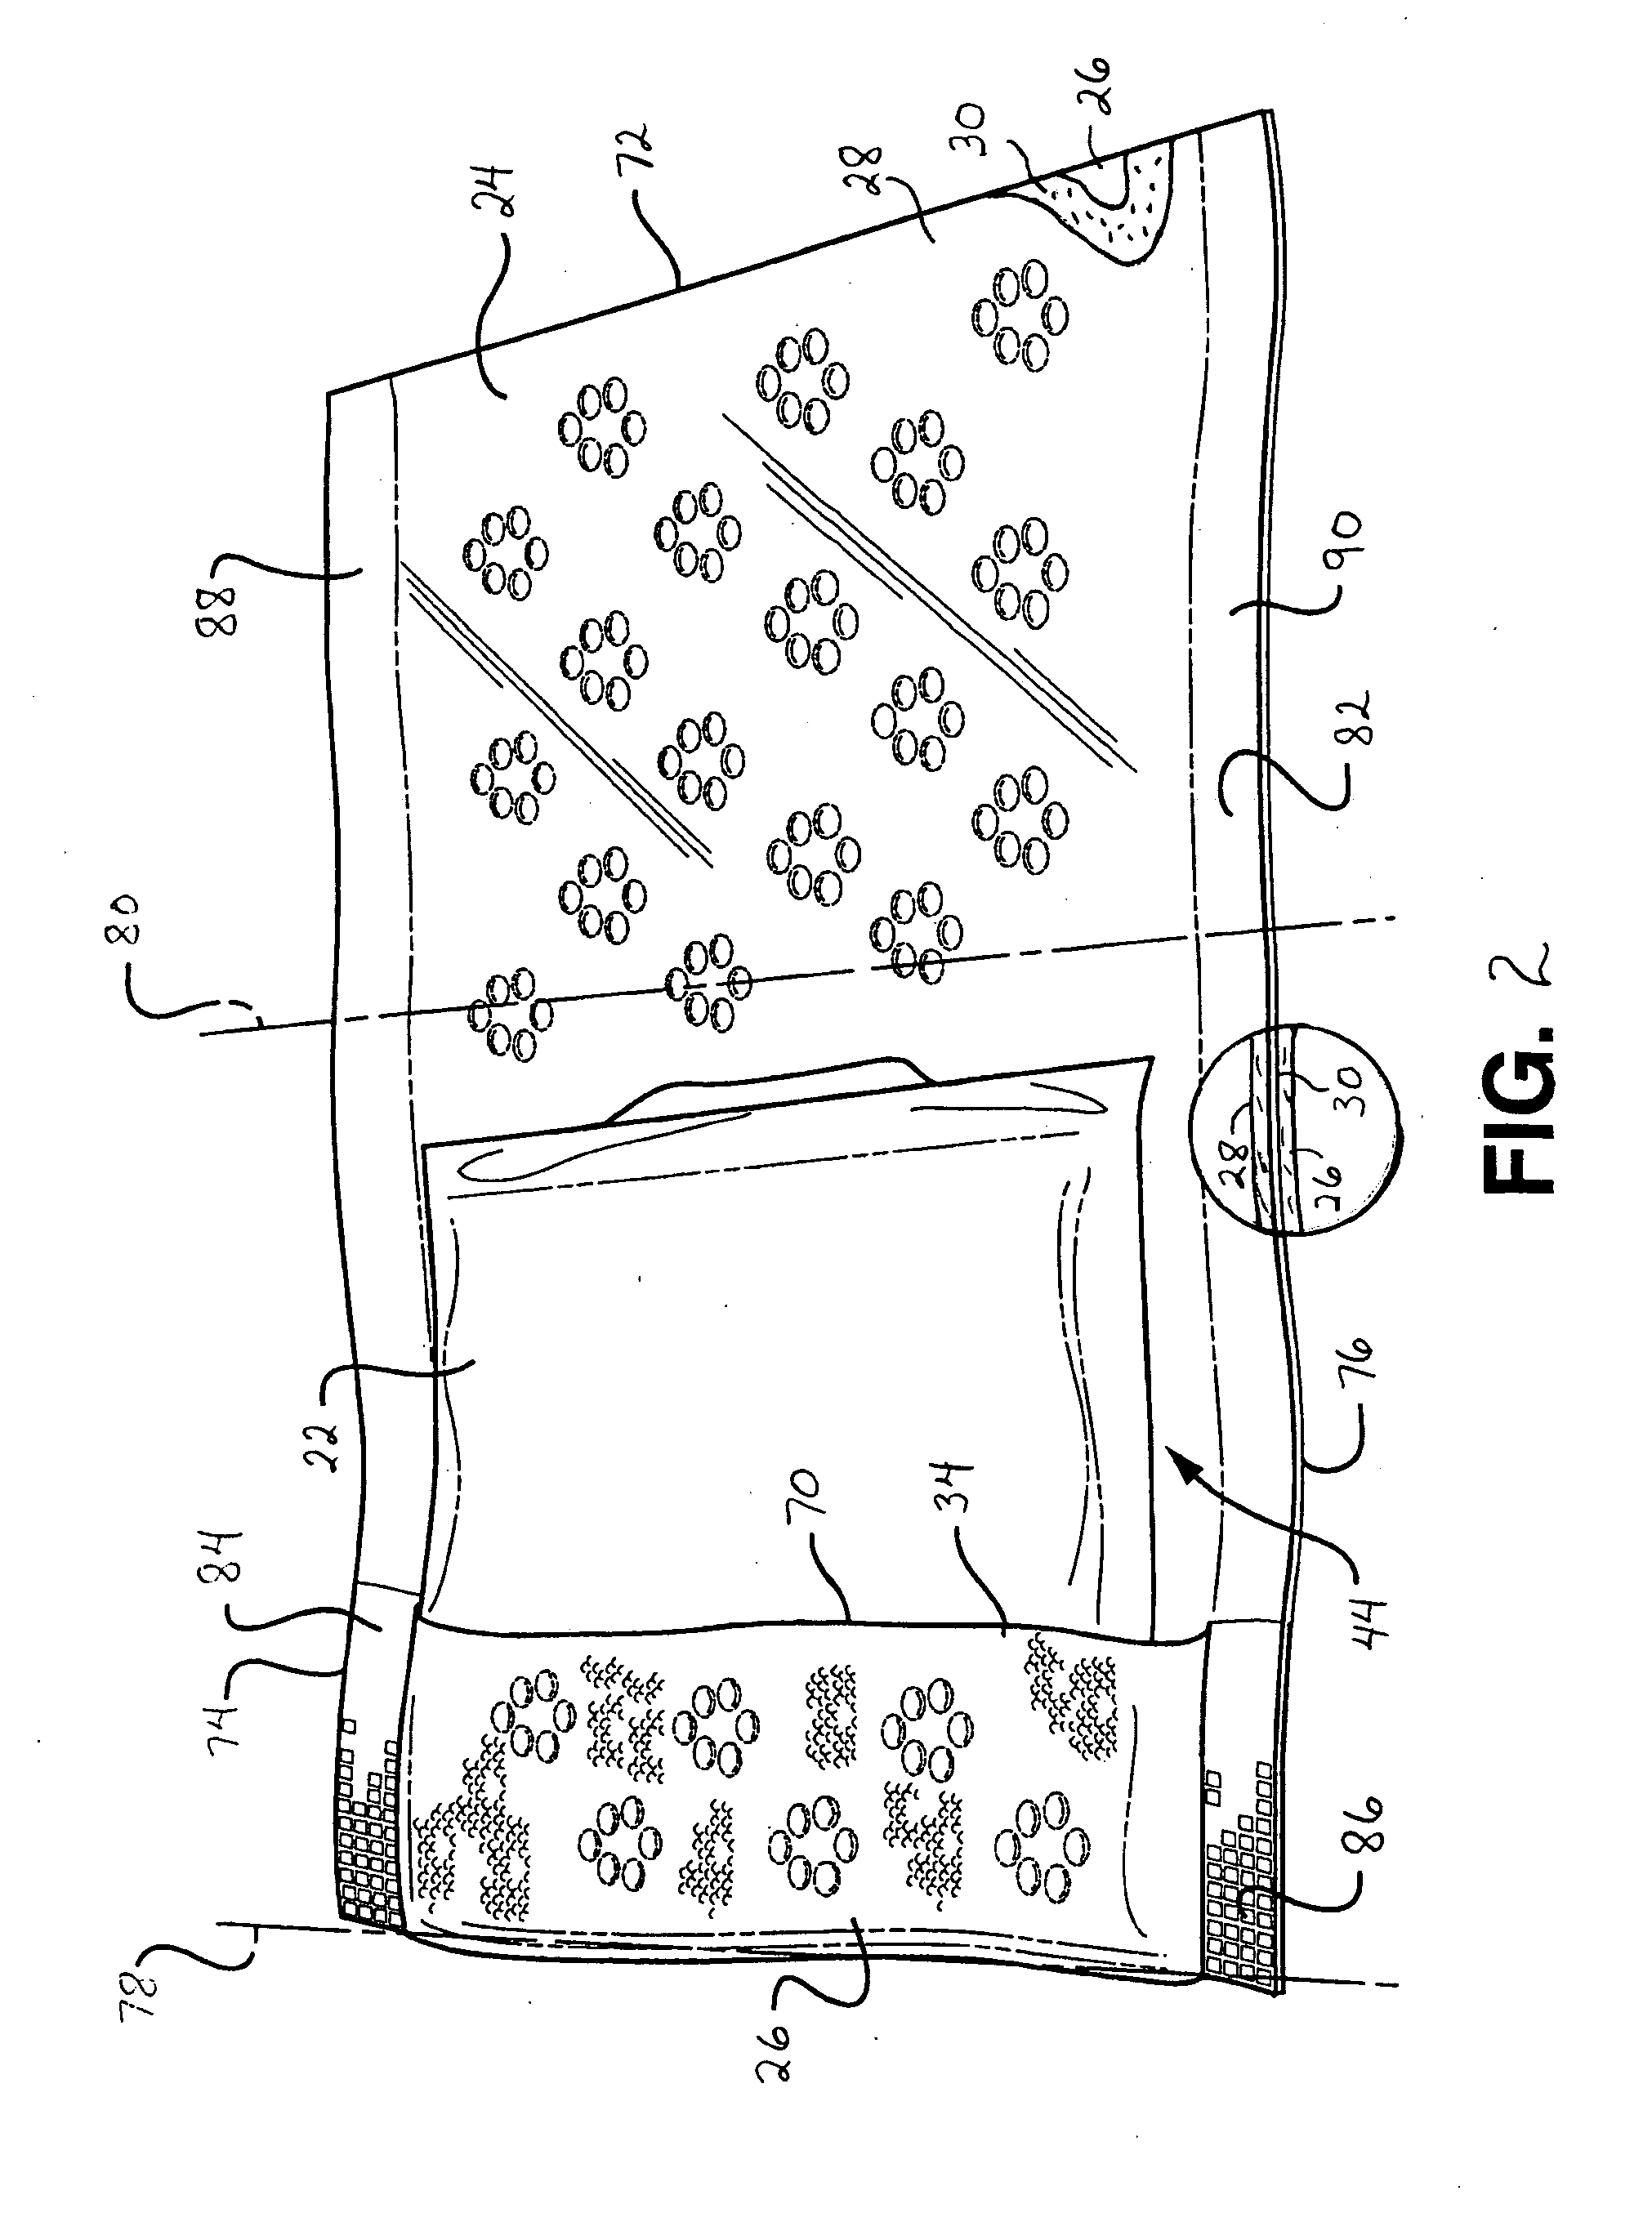 Absorbent personal care article with a wrap member having distinct component layers